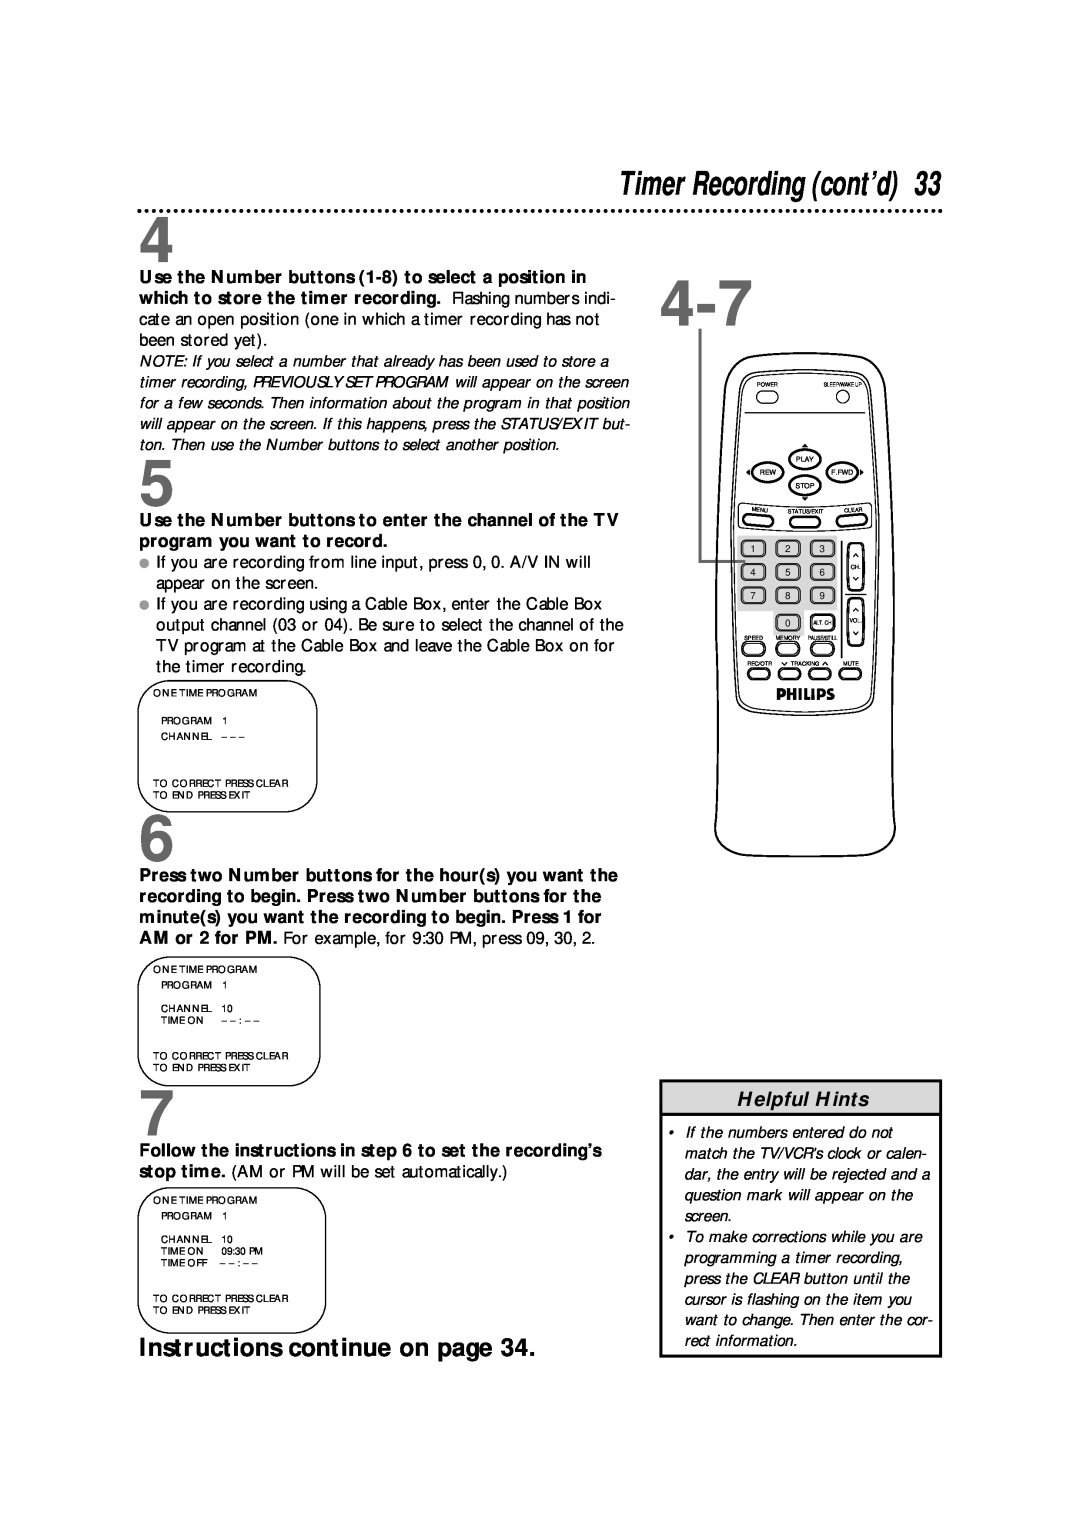 Philips CCB 132AT, CCB 192AT Timer Recording cont’d, Instructions continue on page, Helpful Hints, rect information 